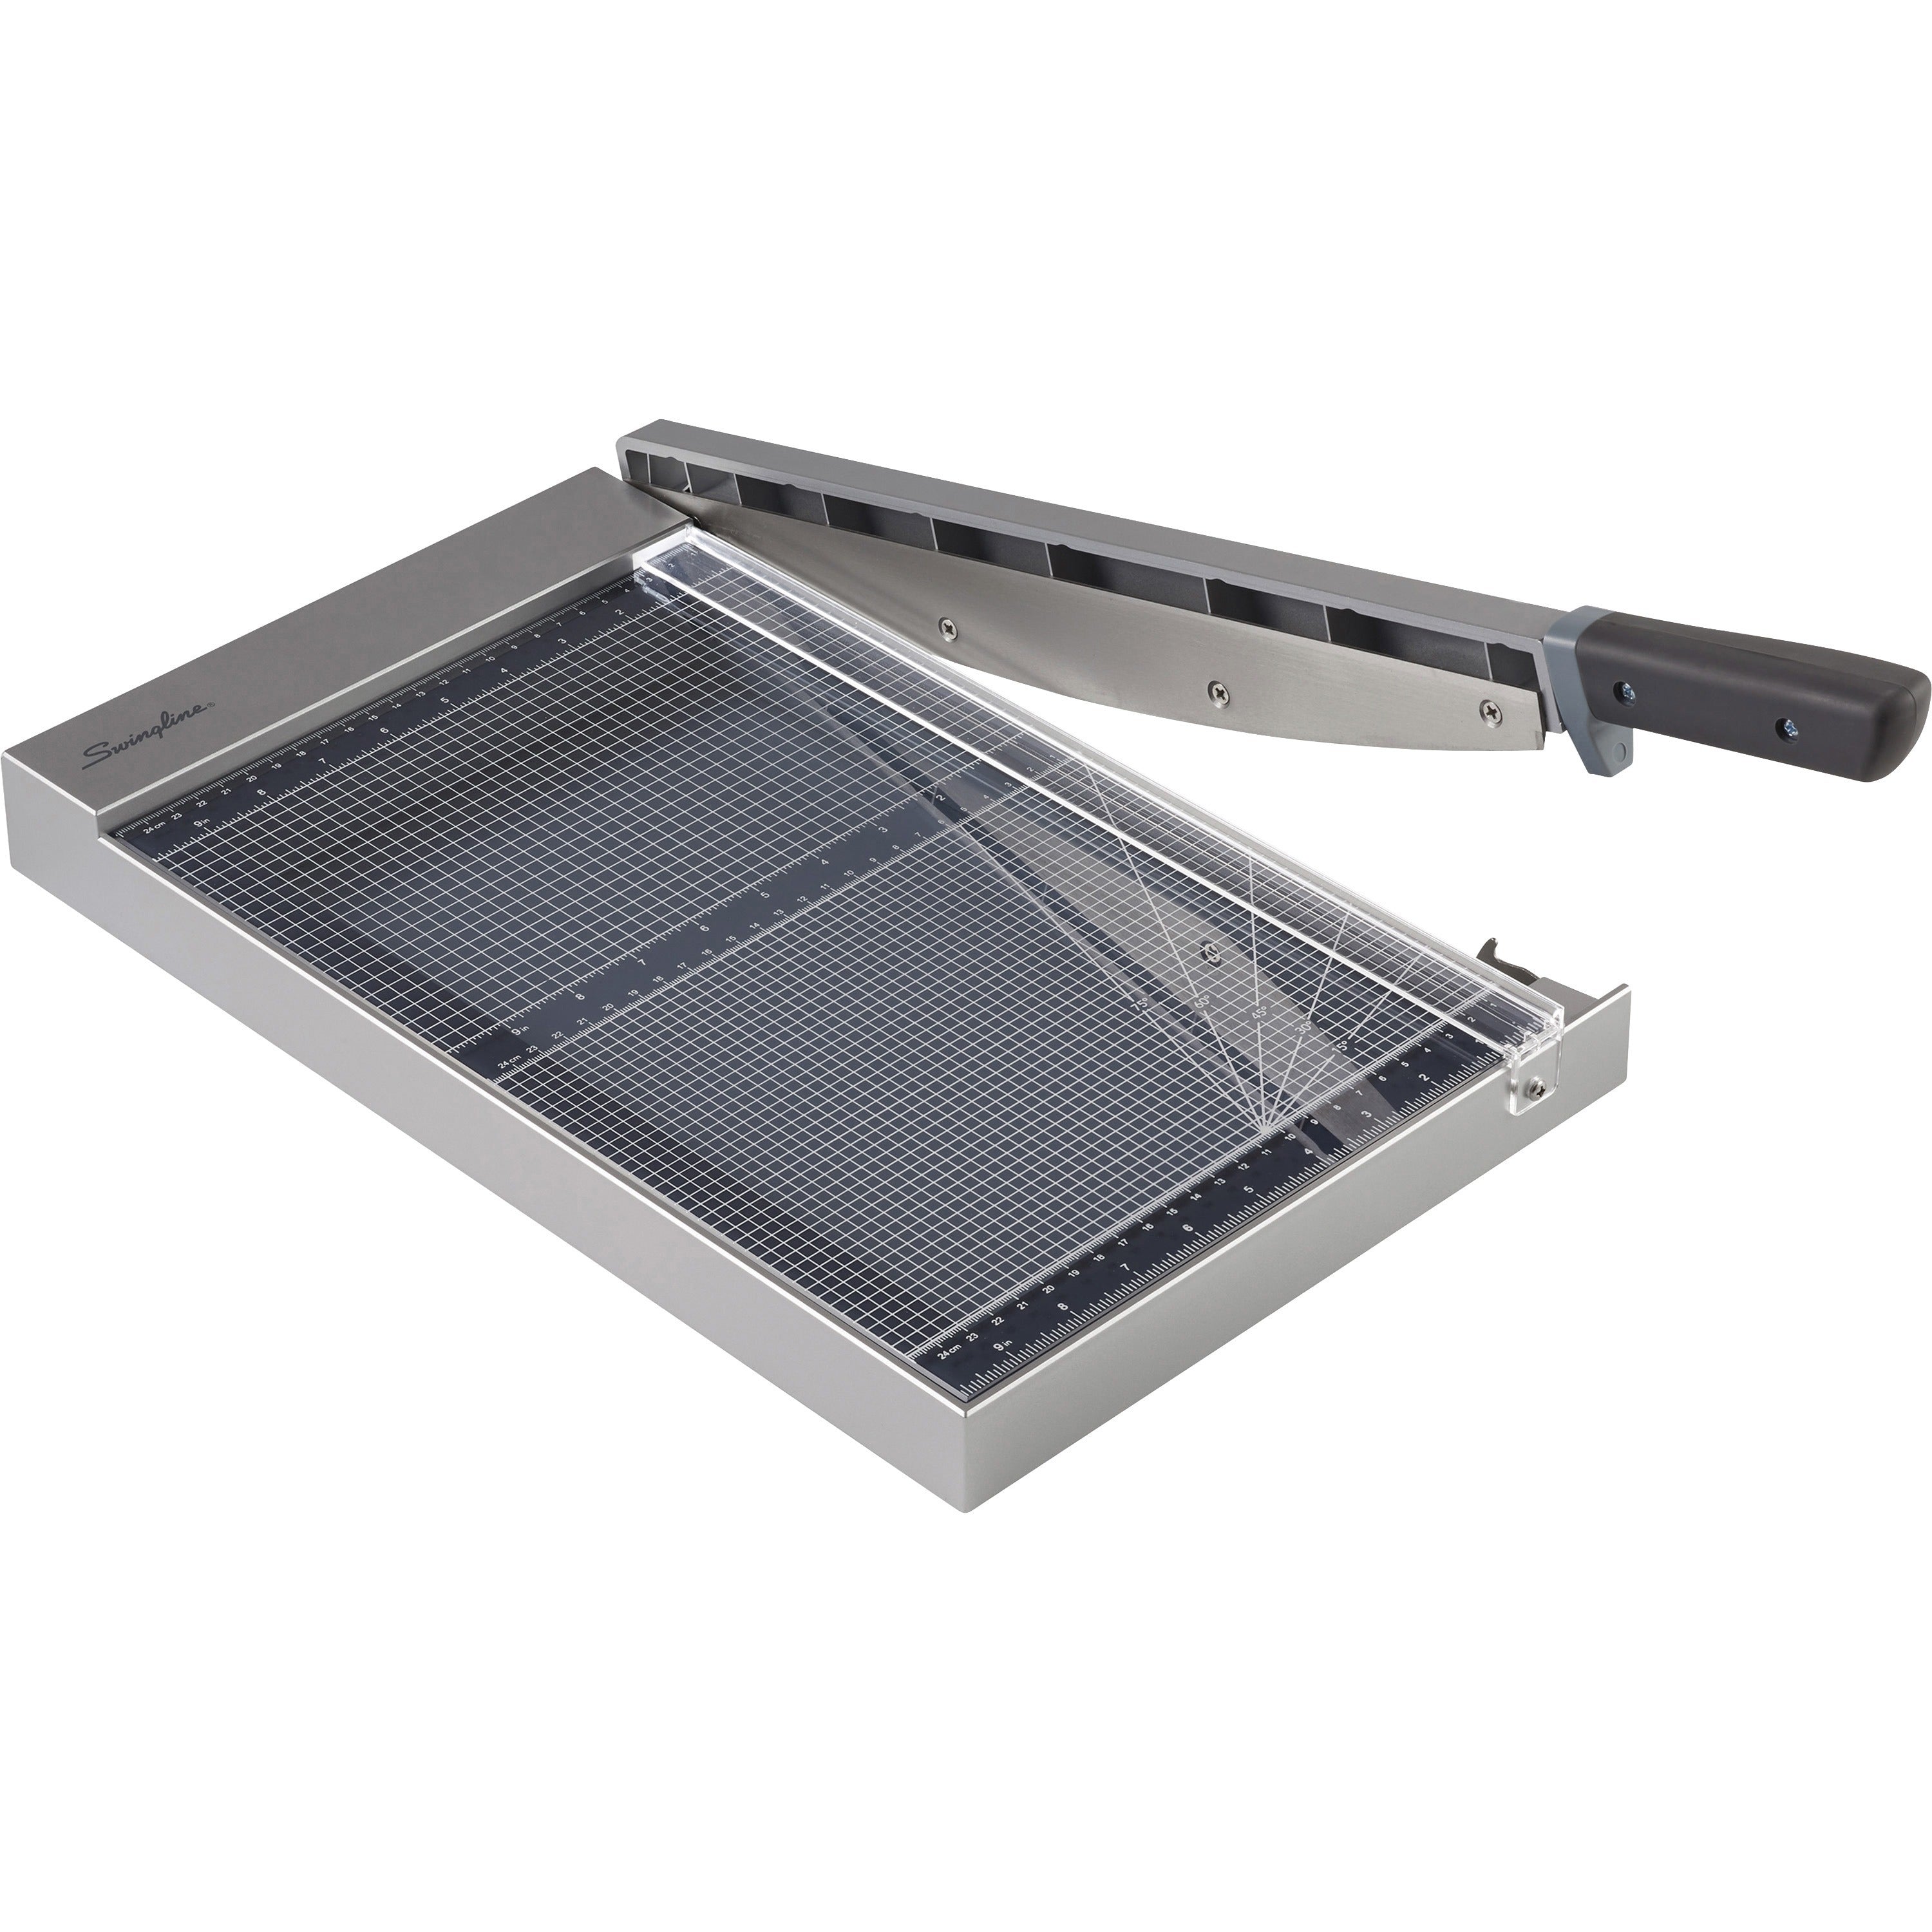 swingline-classiccut-guillotine-glass-trimmer-15-sheet-cutting-capacity-15-cutting-length-safety-latch-tempered-glass-gray-1-each_swi10014 - 1